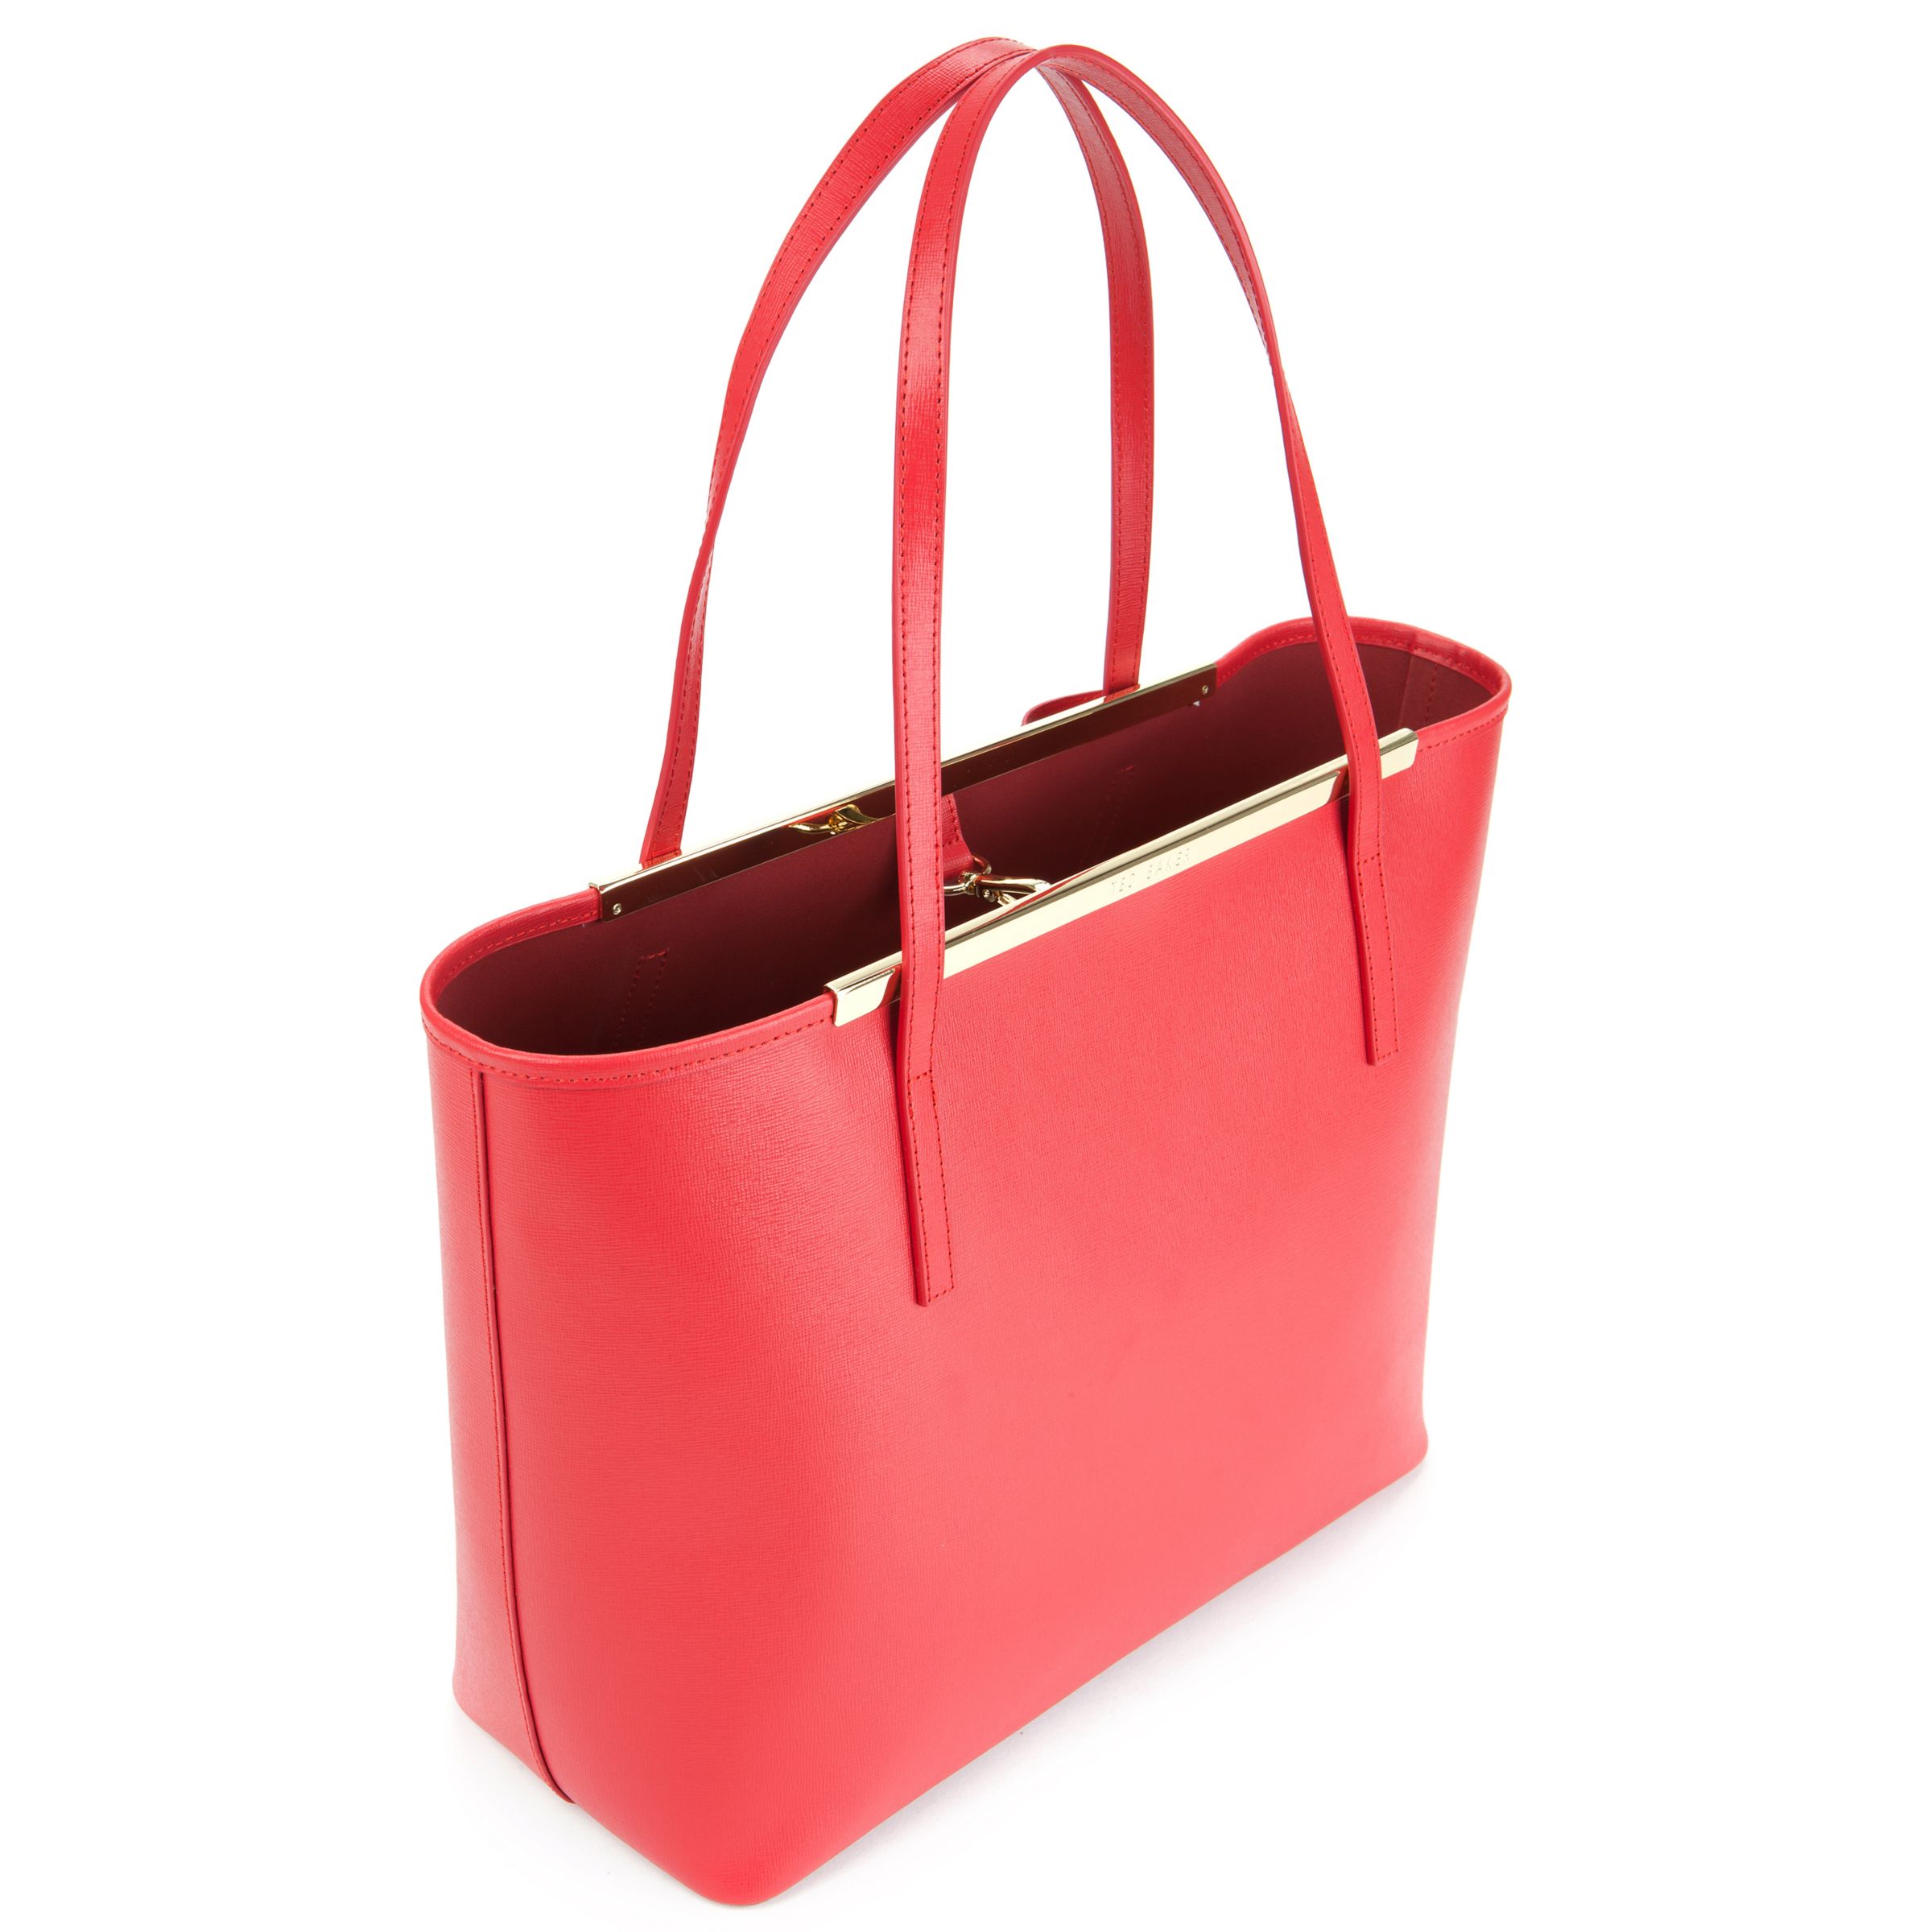 Ted Baker Lilley Small Crosshatch Shopper Bag, Red at John Lewis & Partners